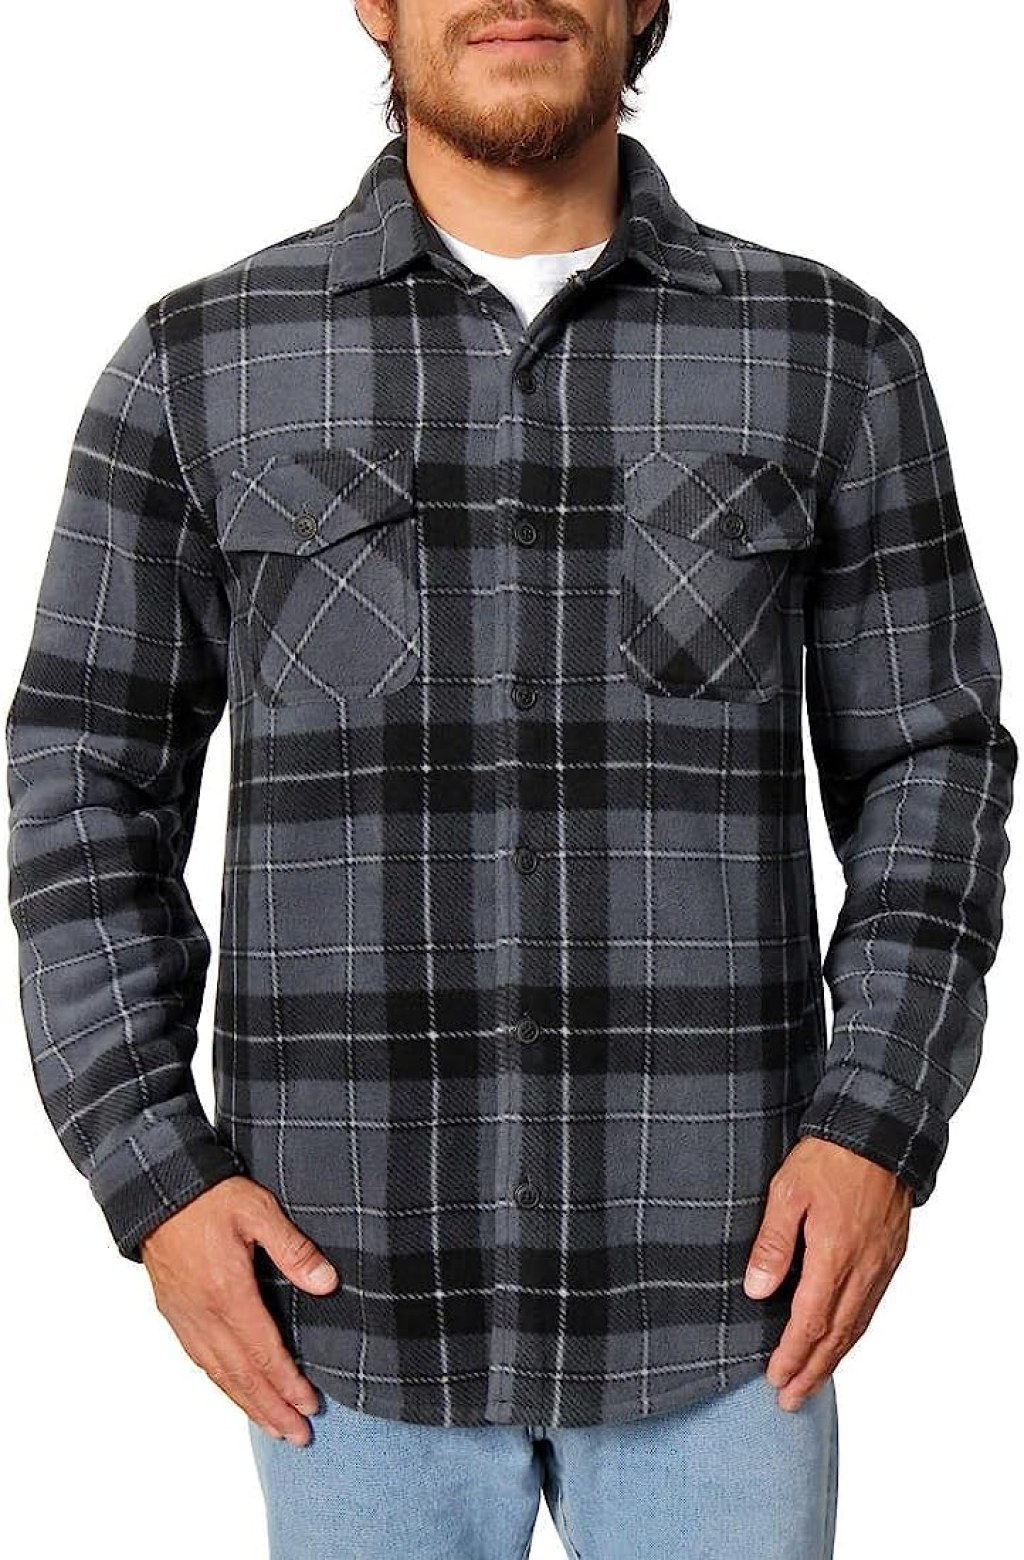 Picture of: Freedom Foundry Men’s Plaid Fleece Jackets Super Plush Sherpa Lined Jacket  Shirt at Amazon Men’s Clothing store